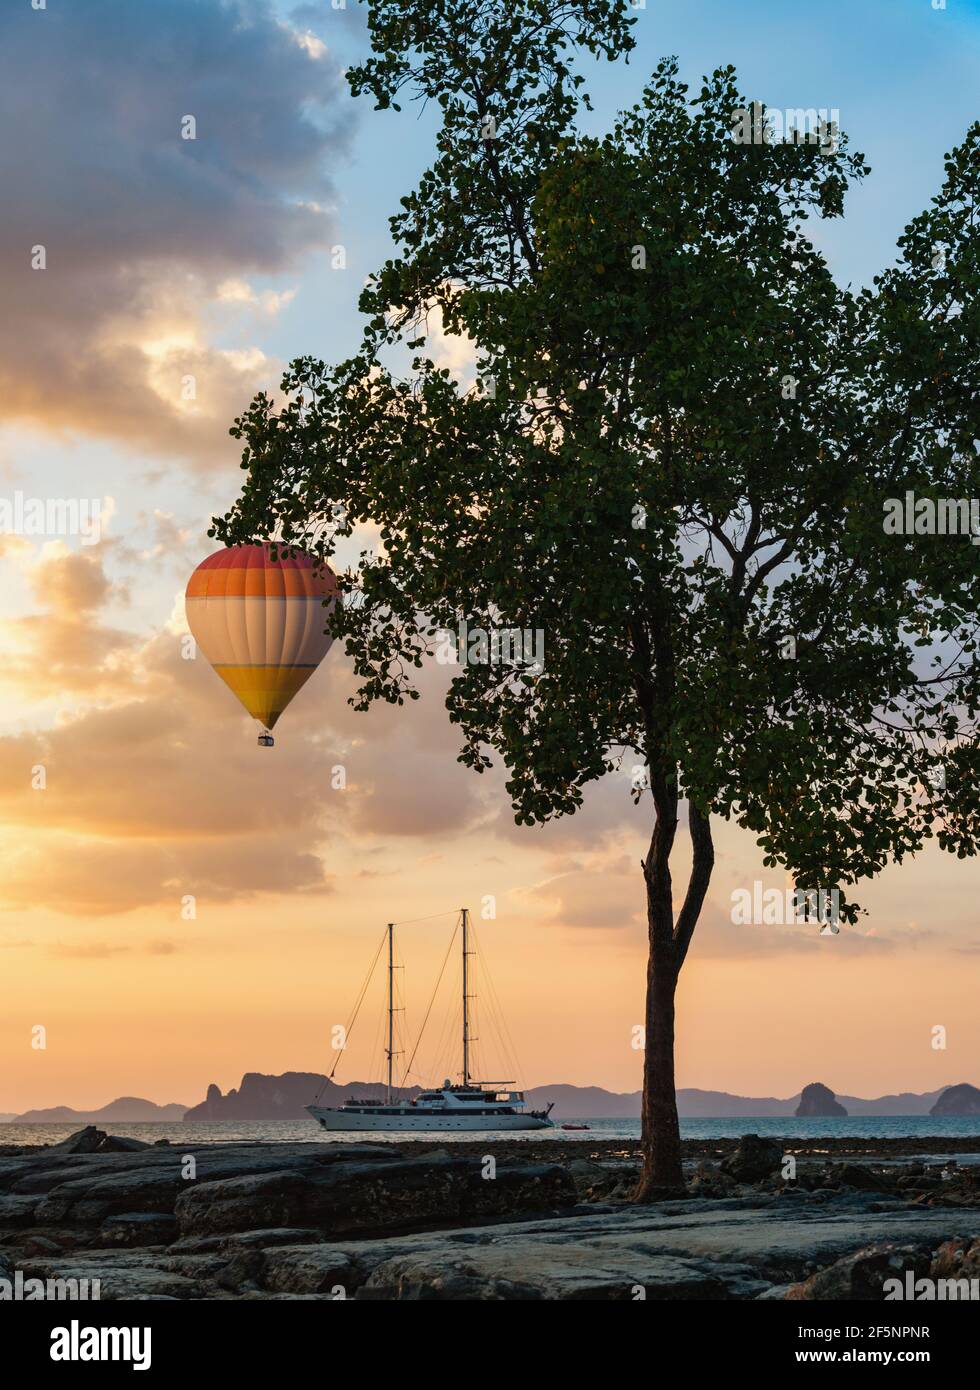 Thailand coastline, hot air balloon over sea and yacht in marine at sunset Stock Photo